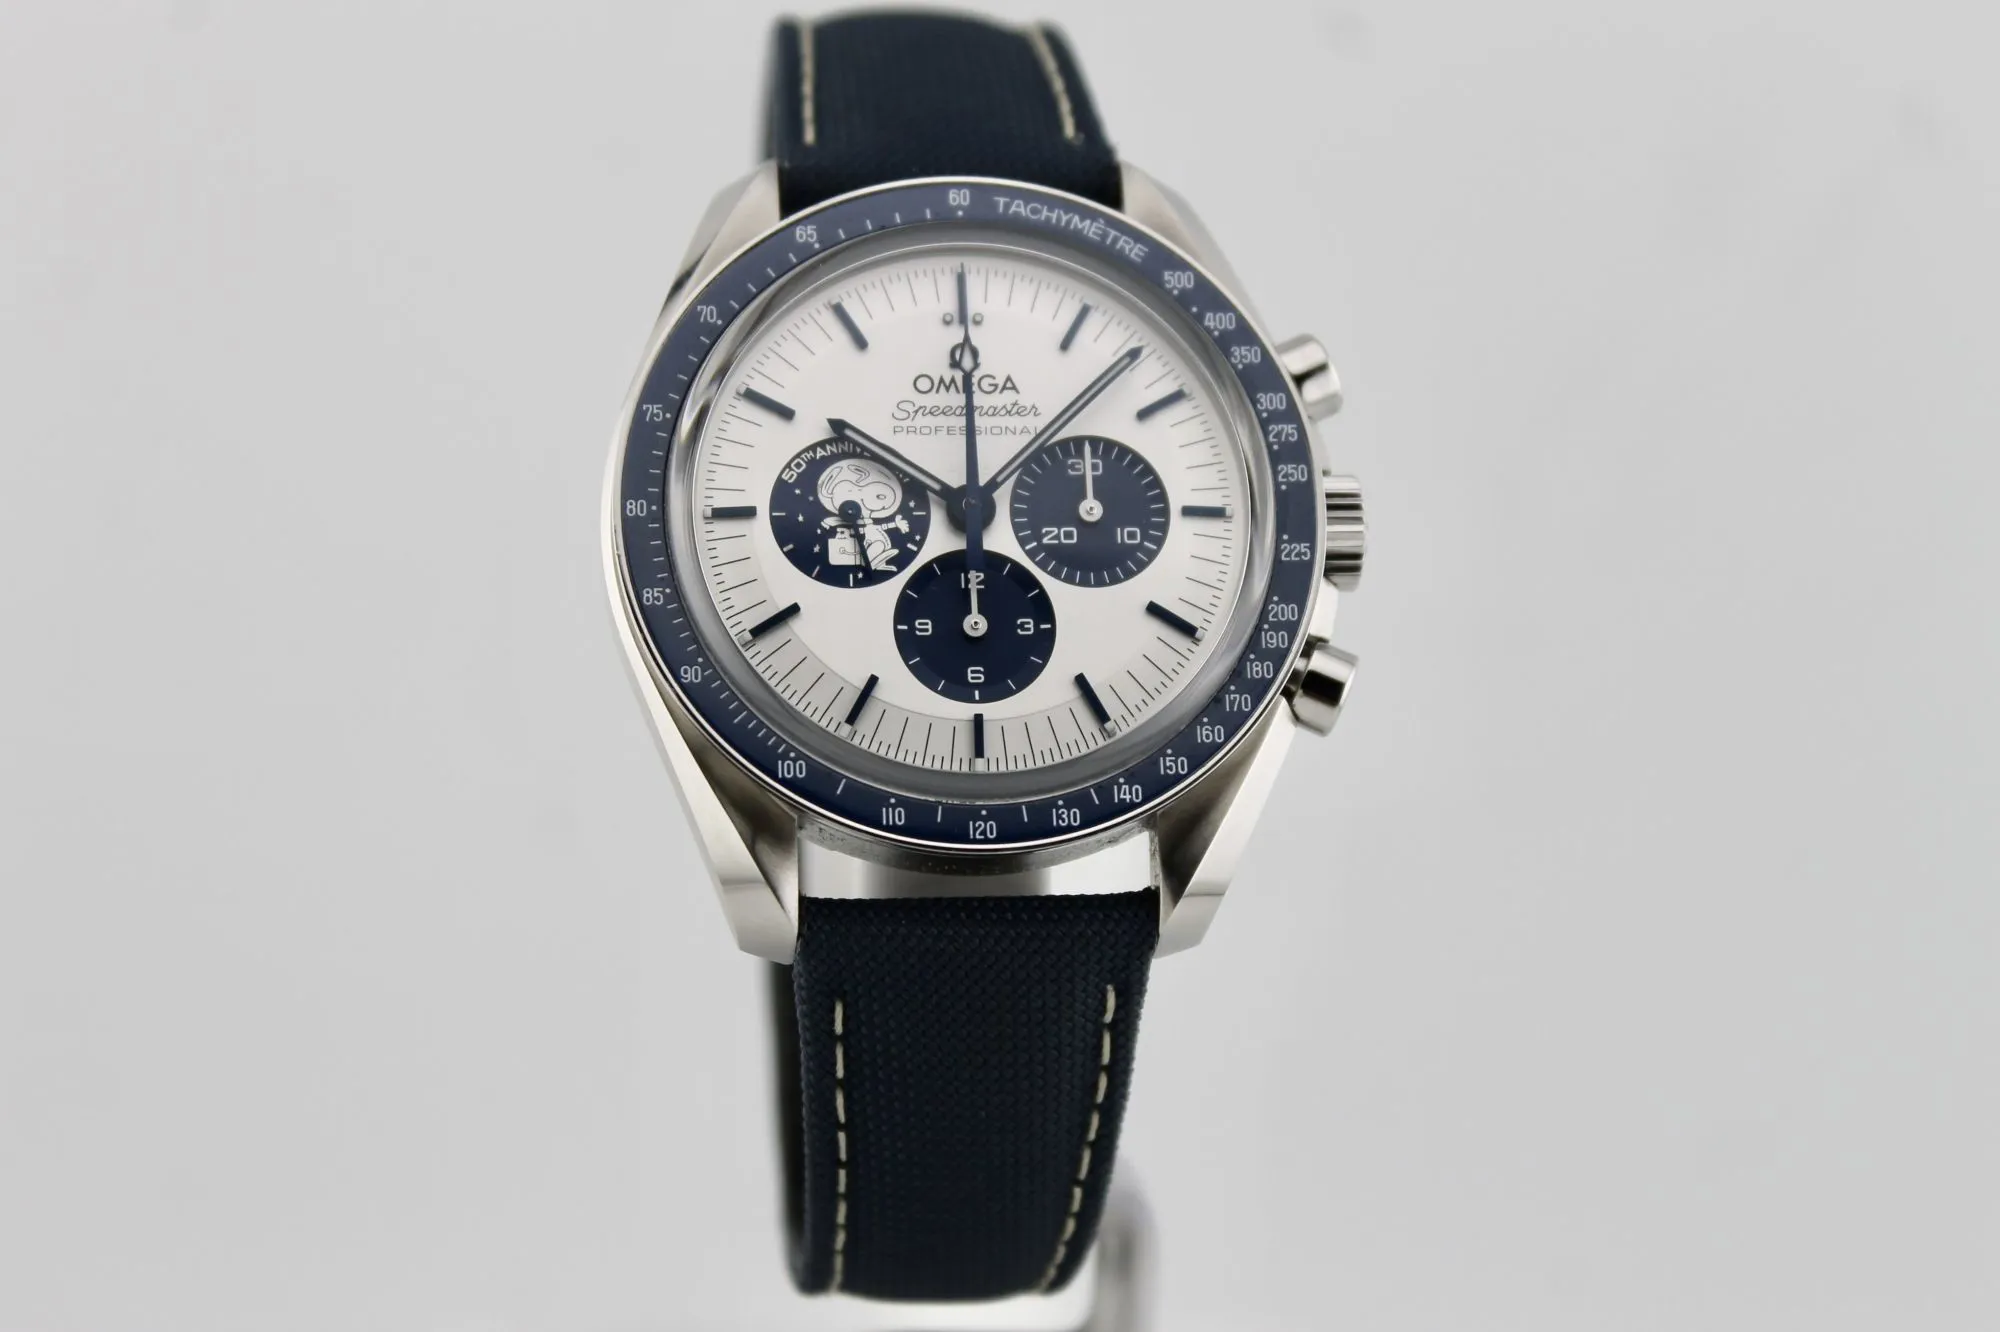 Omega Speedmaster Professional Moonwatch 310.32.42.50.02.001 42mm Stainless steel Silver